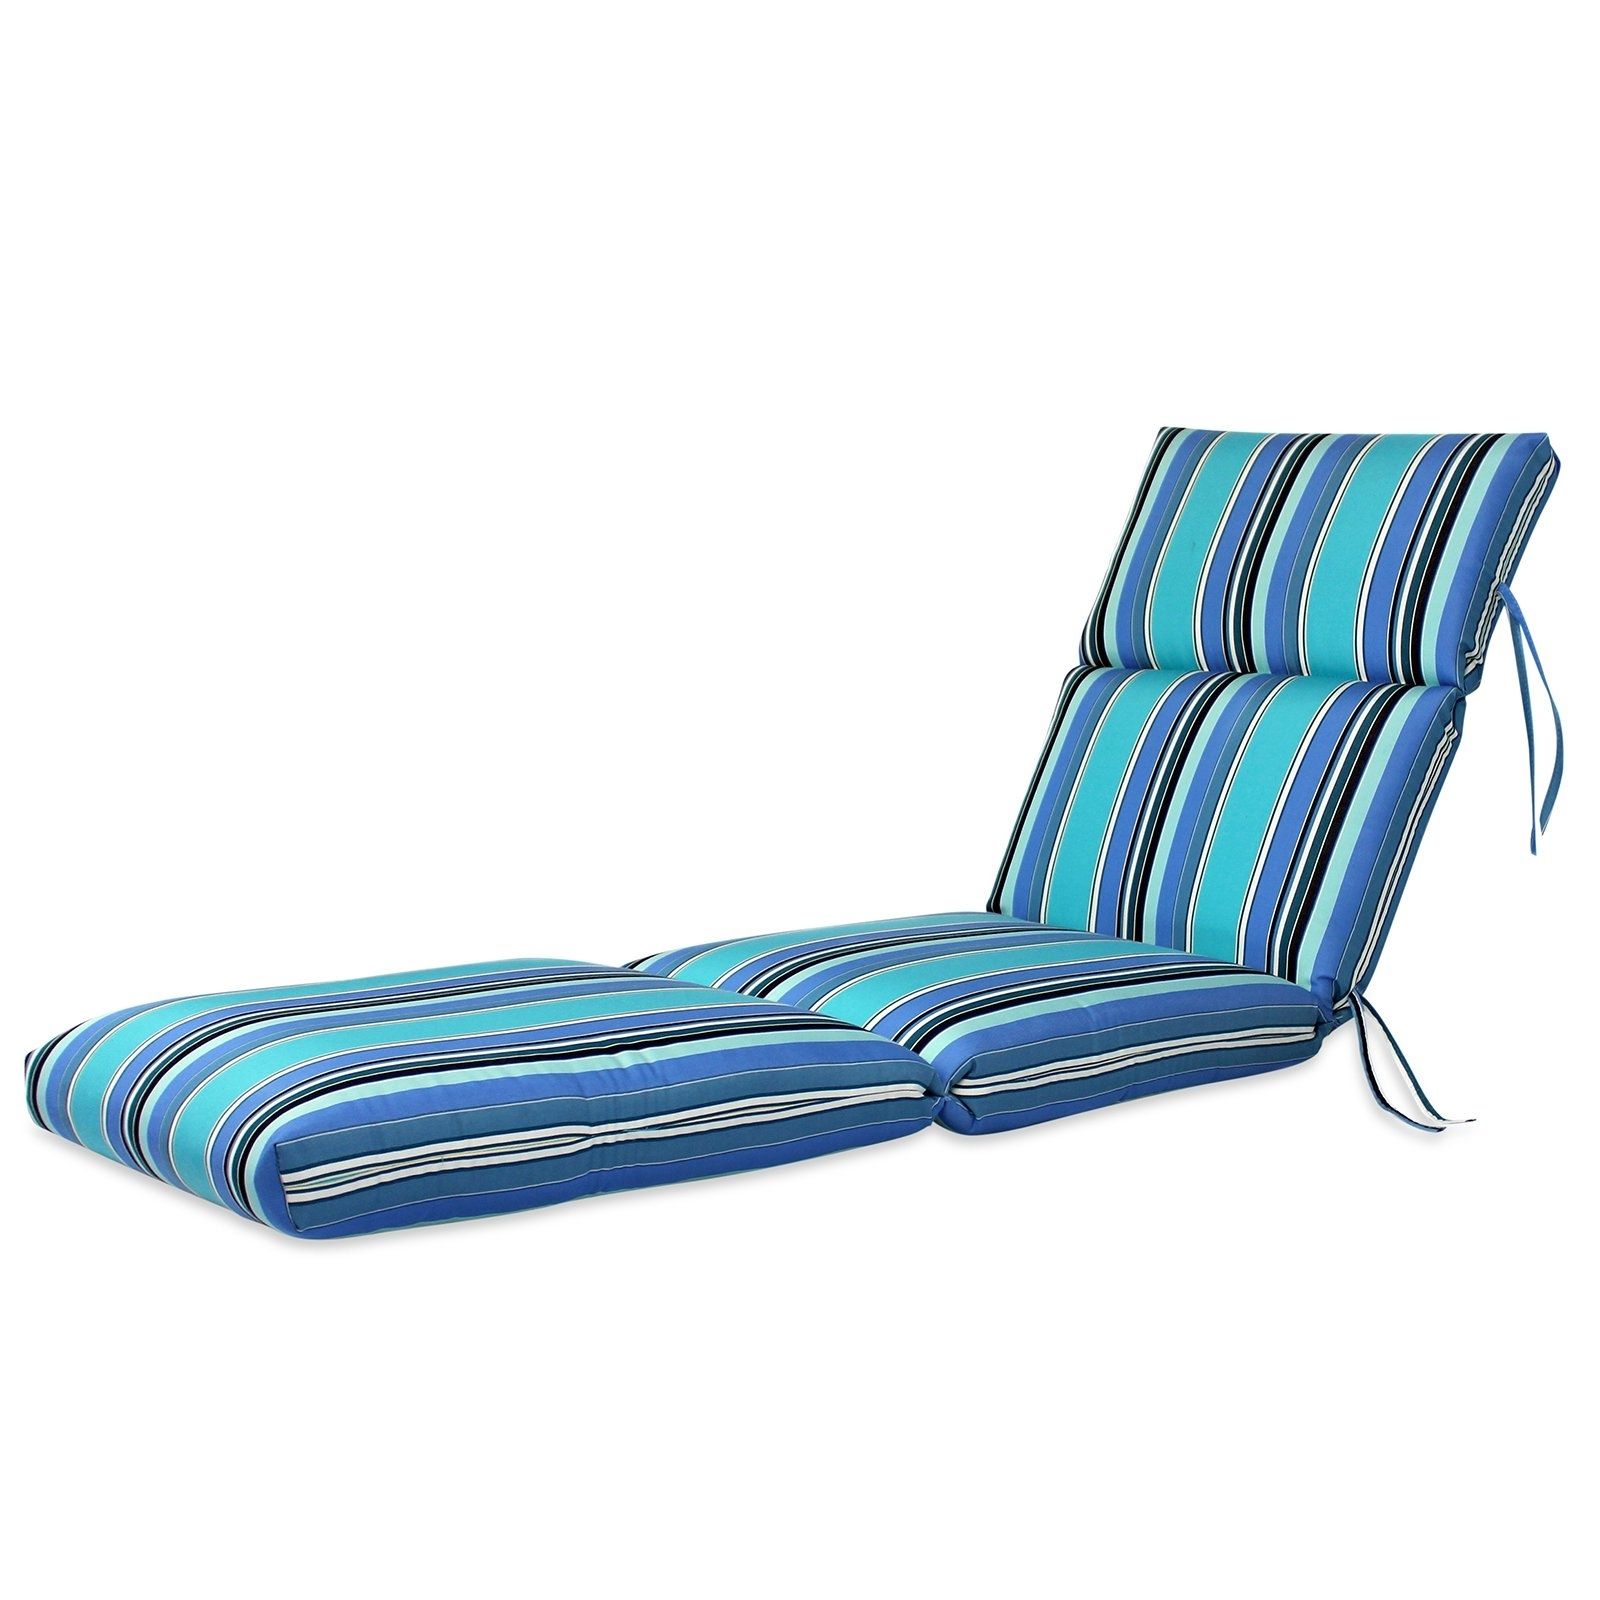 Comfort Classics 72 X 22 In. Sunbrella Channeled Chaise Lounge Regarding Most Current Sunbrella Chaise Lounge Cushions (Photo 13 of 15)